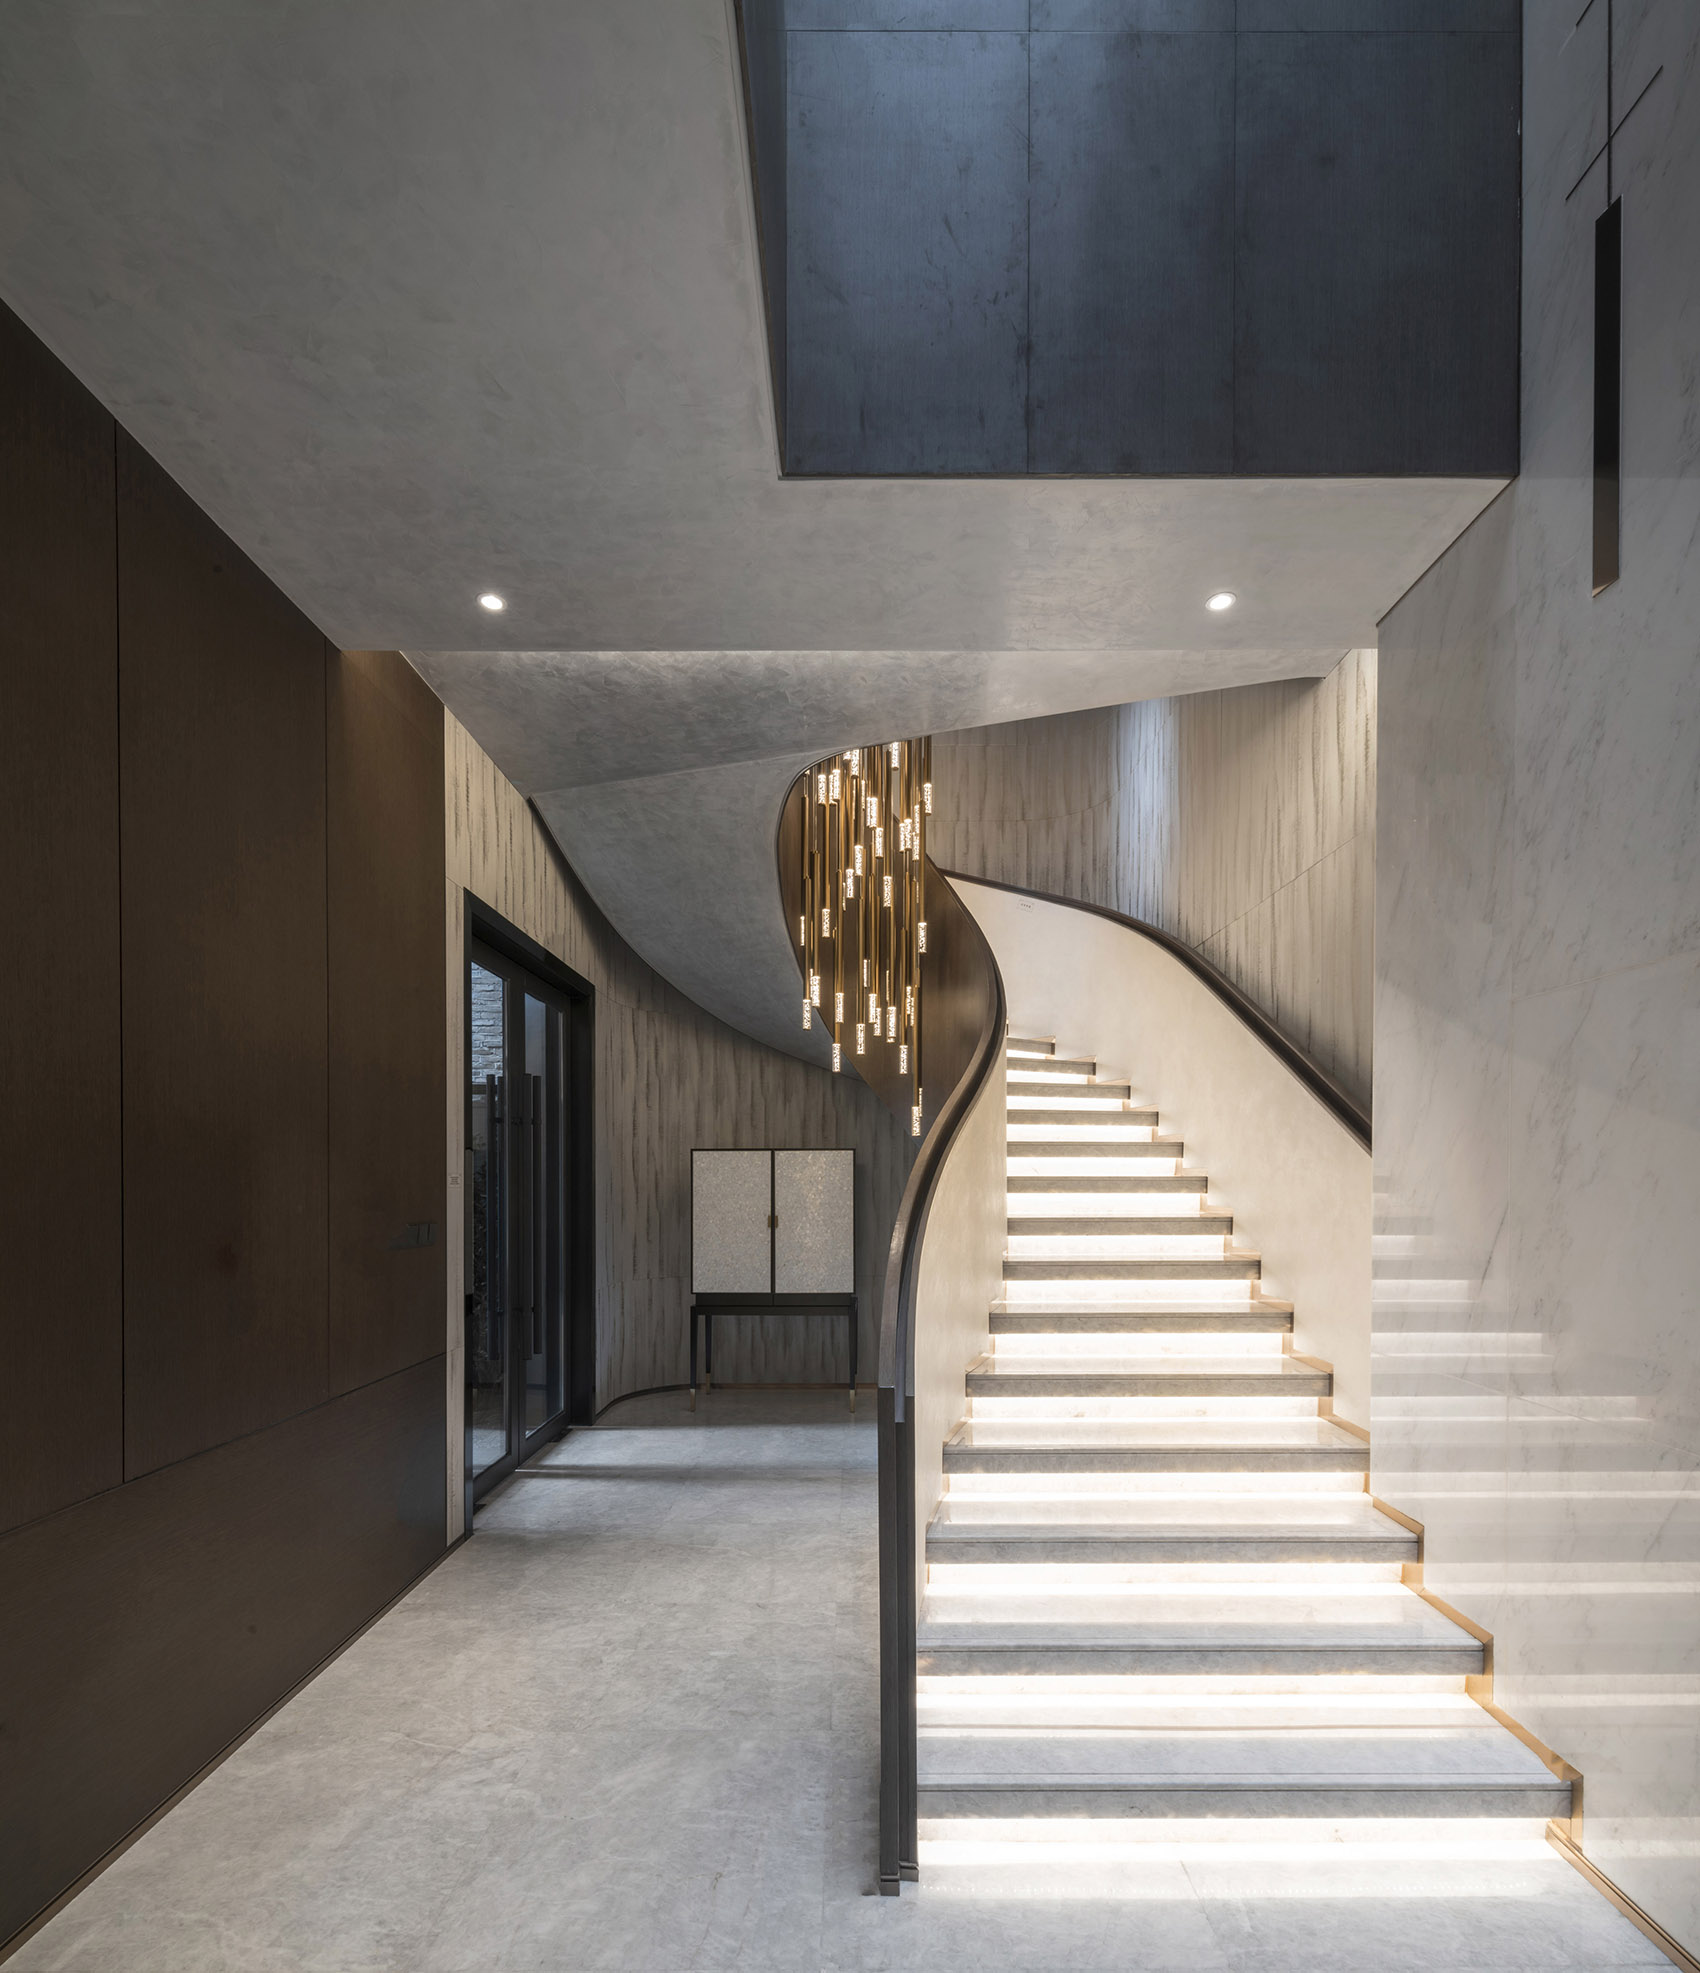 038-cangxia-renovation-project-by-jund-architects.jpg